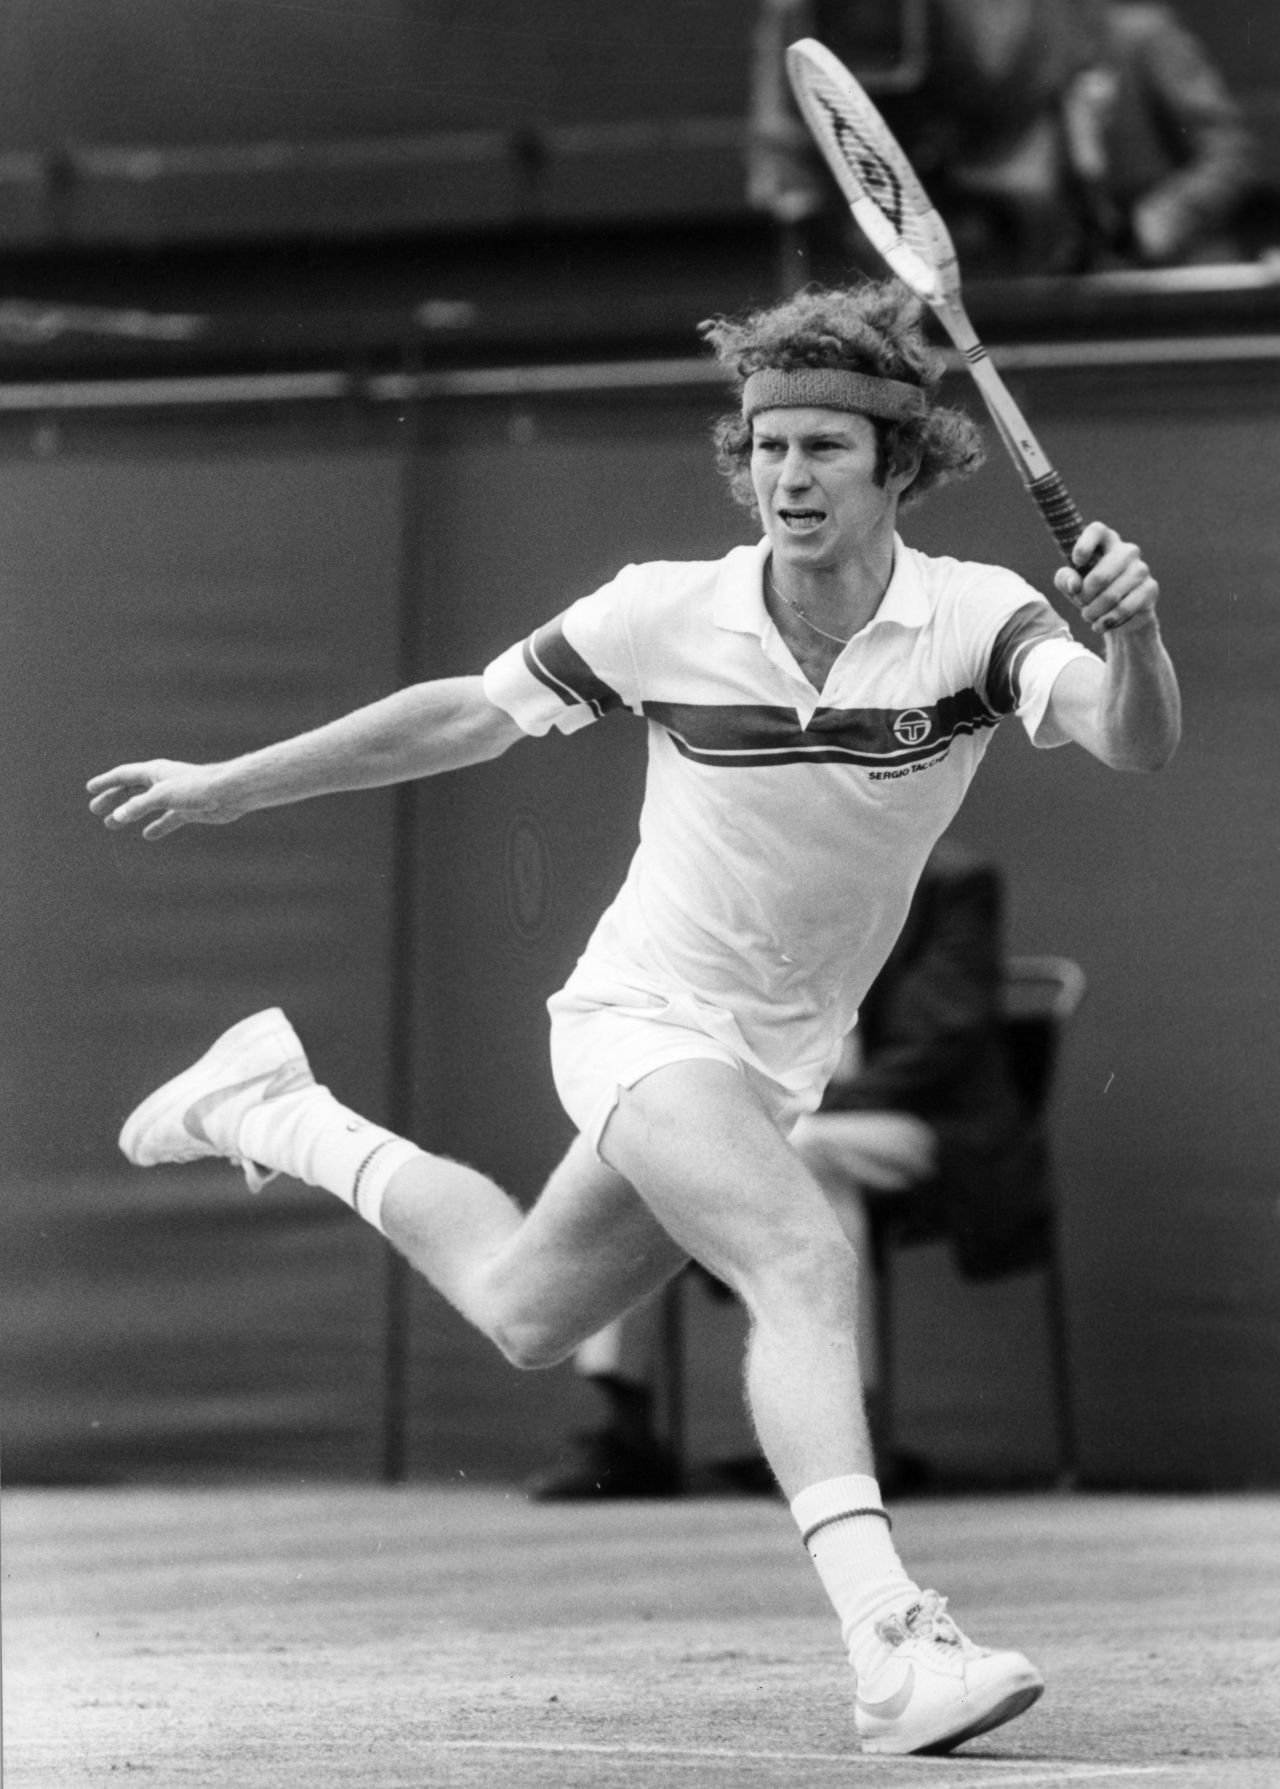 By 1981, McEnroe got his golden moment against his hero and rival in the Wimbledon final.